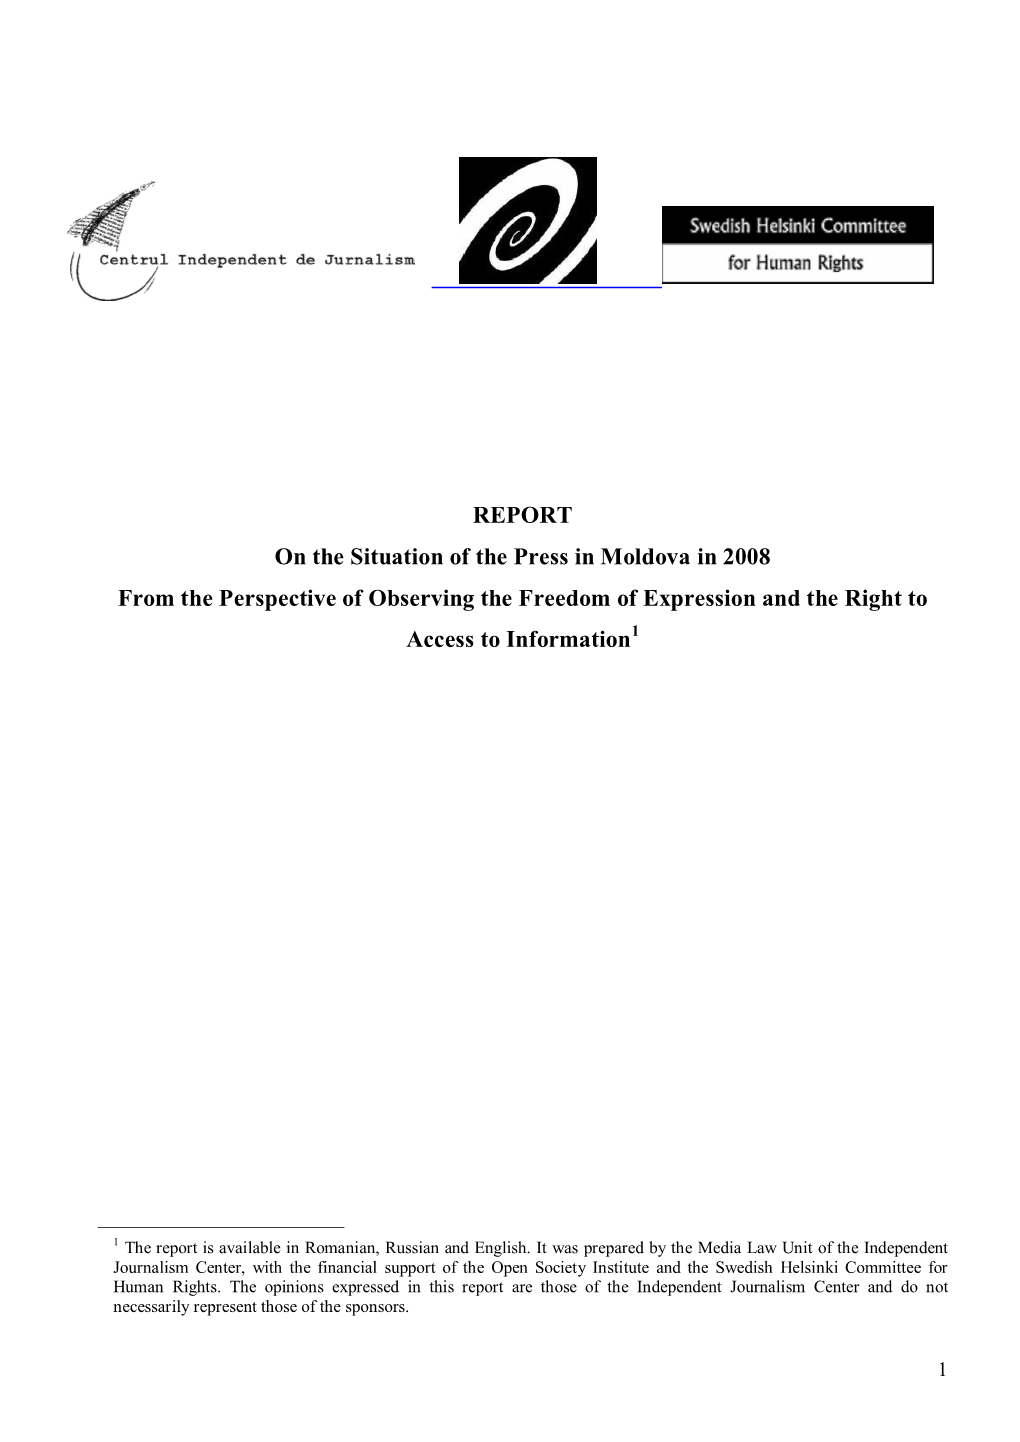 REPORT on the Situation of the Press in Moldova in 2008 from the Perspective of Observing the Freedom of Expression and the Right to Access to Information1